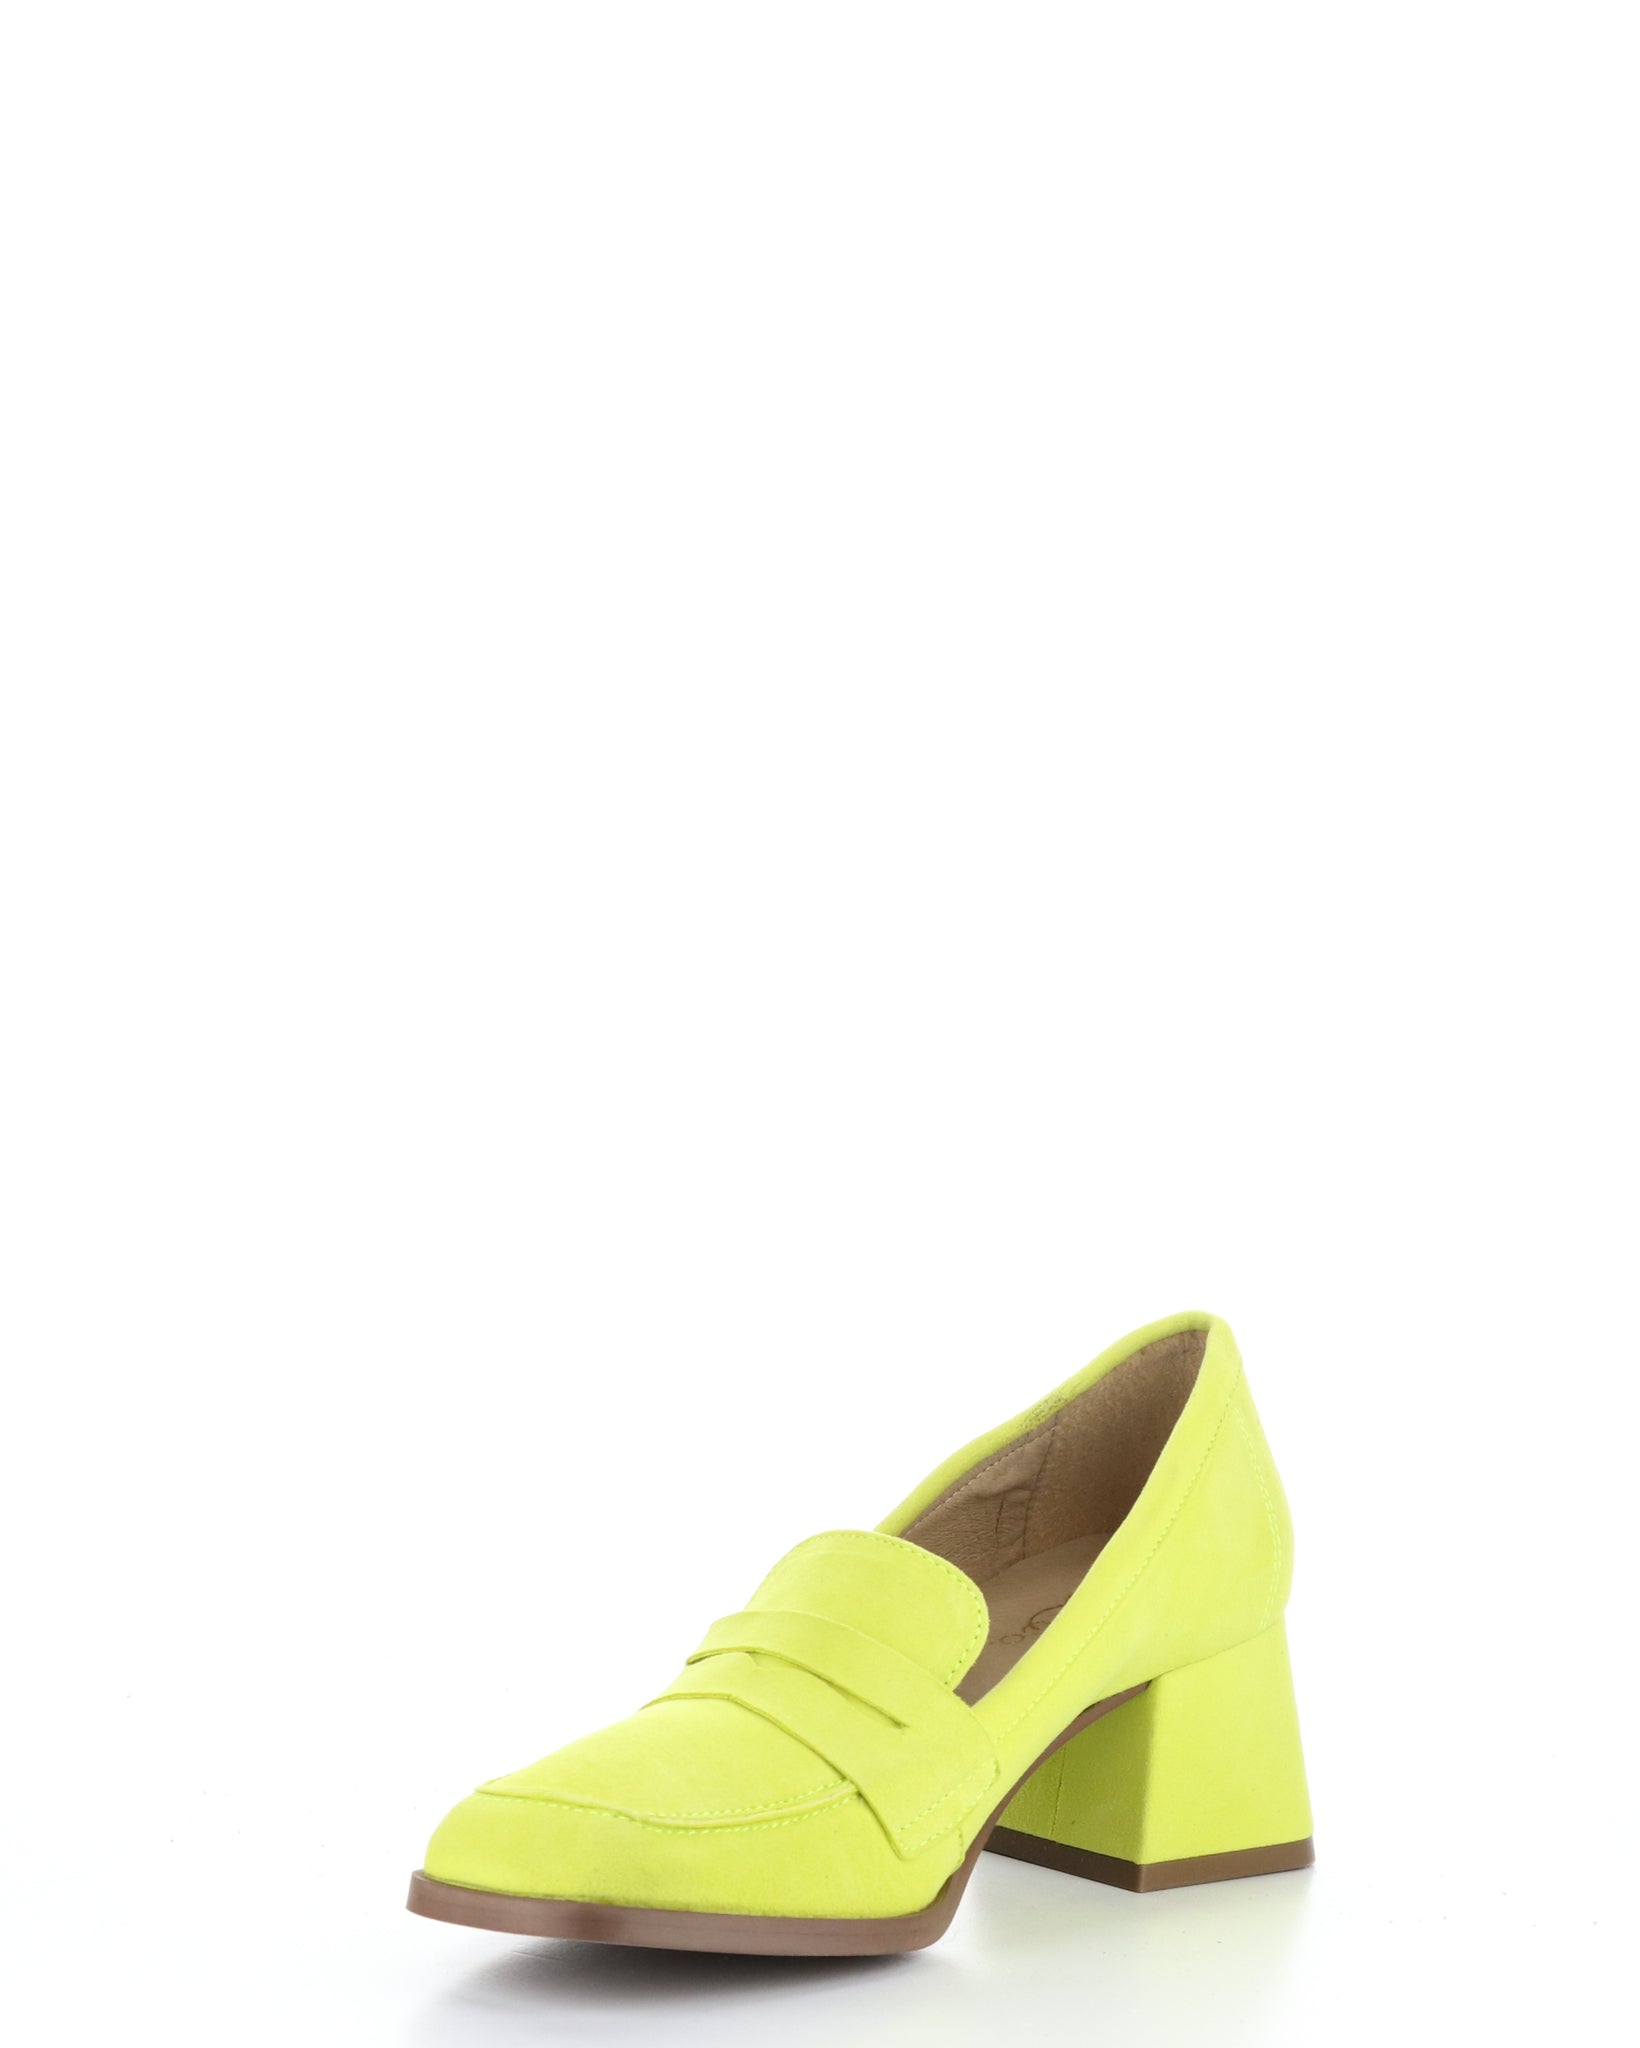 Bos & Co 'Ama" Pear yellow block heeled loafer